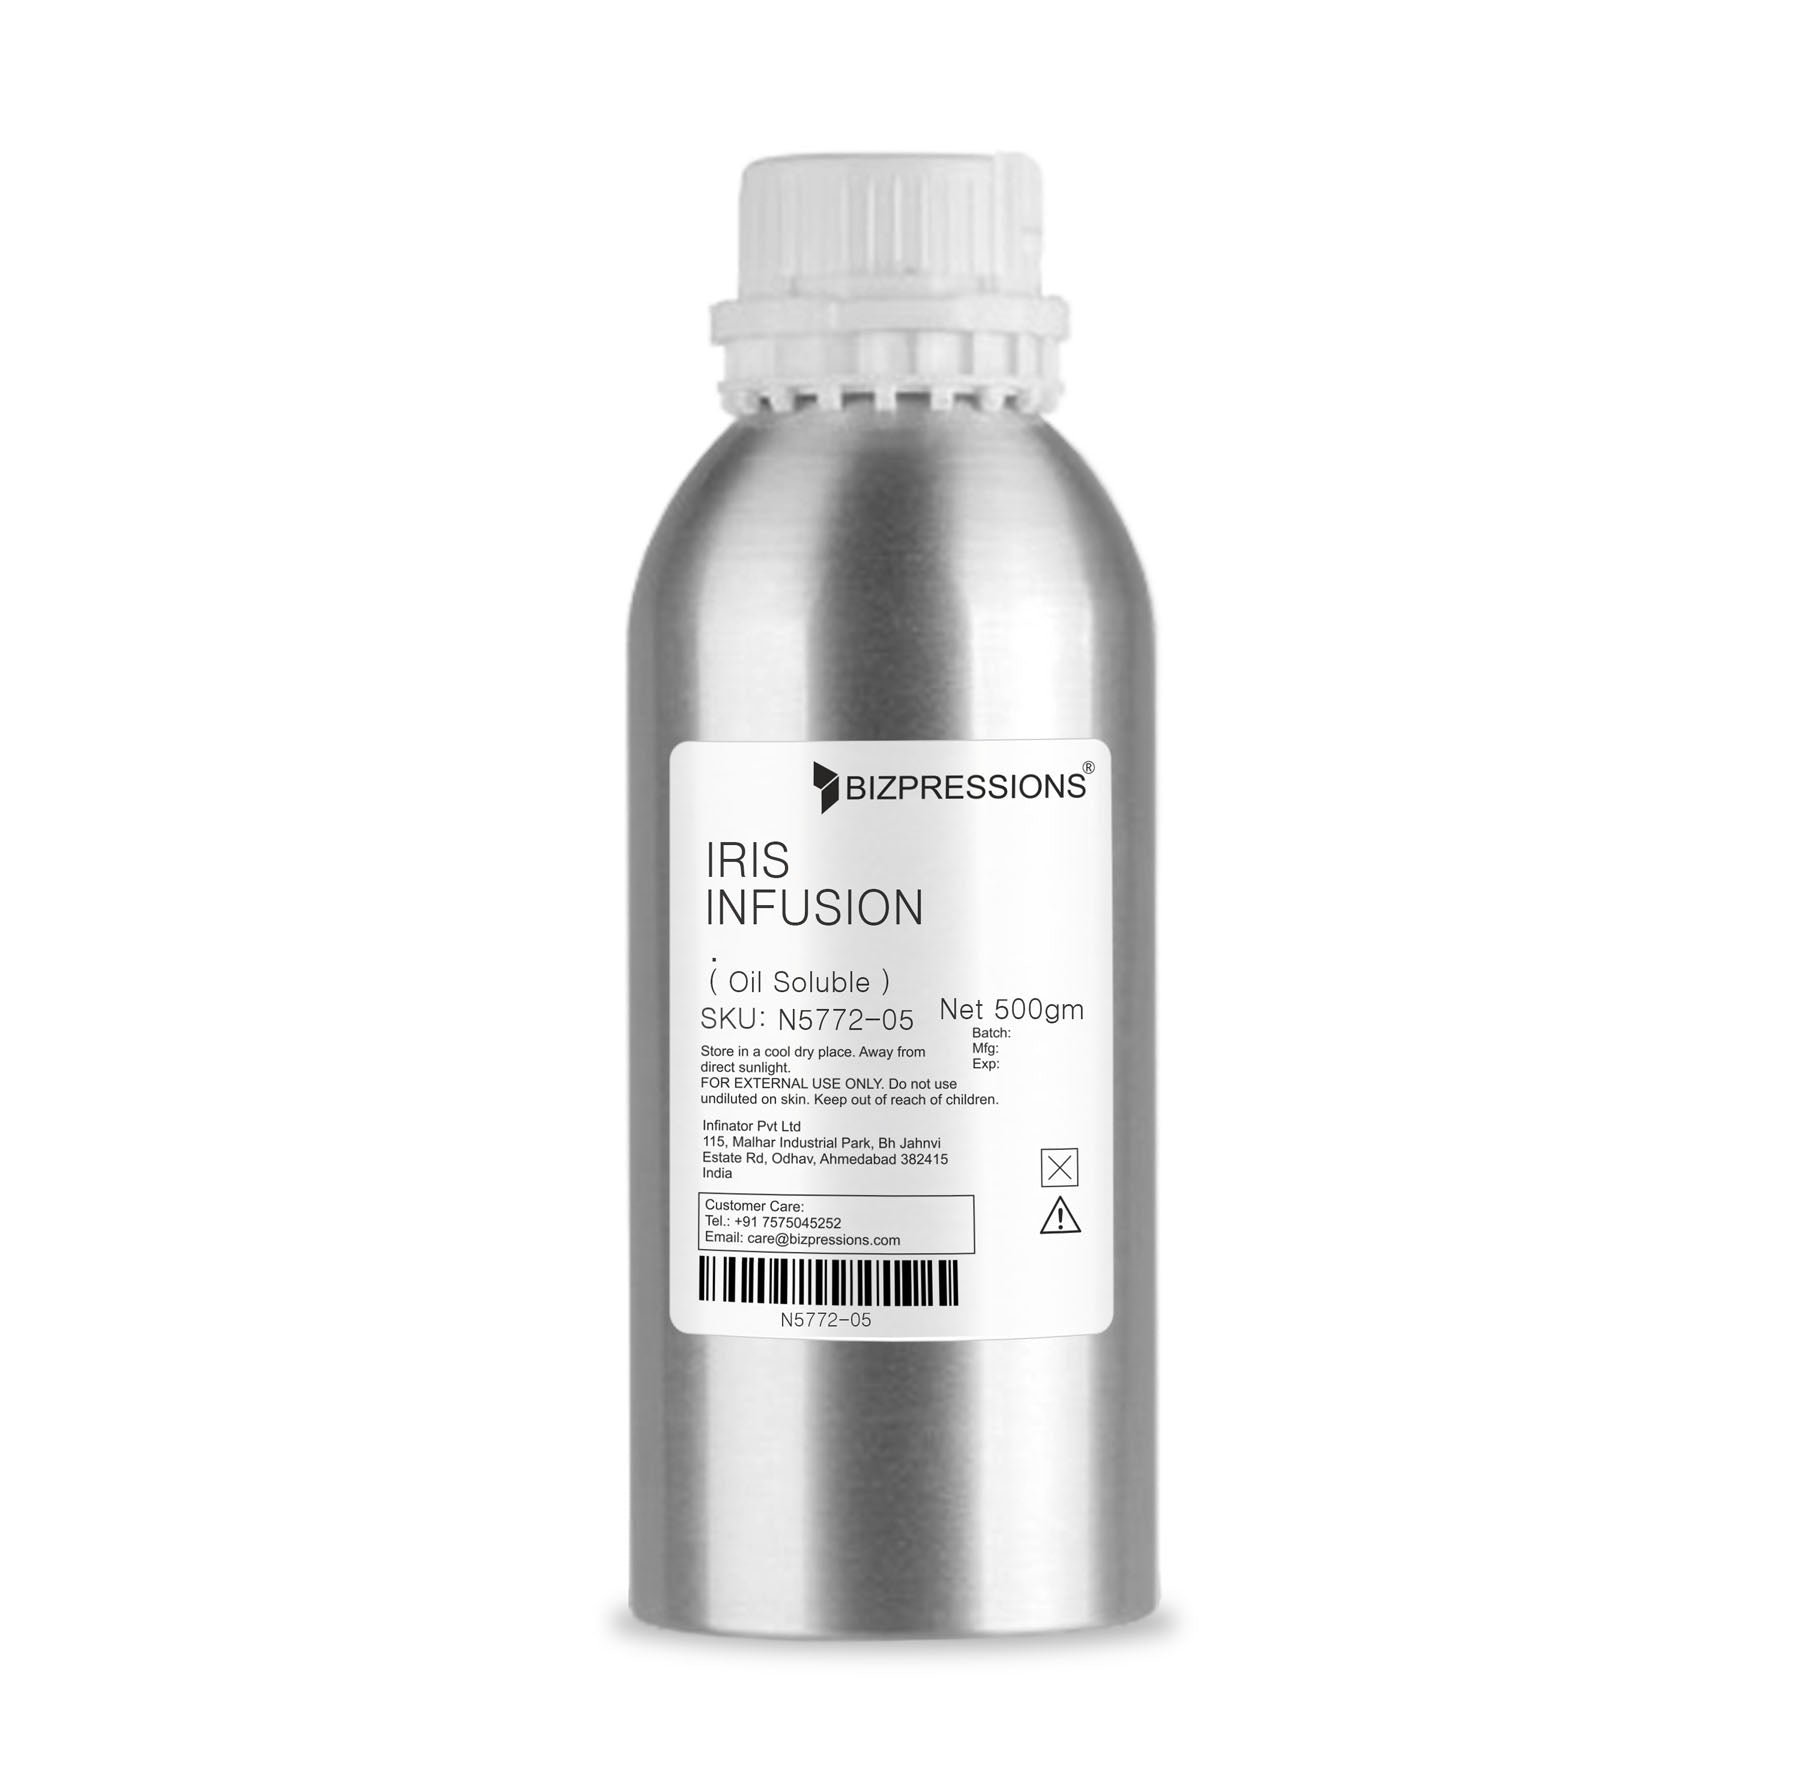 IRIS INFUSION - Fragrance ( Oil Soluble ) - 500 gm